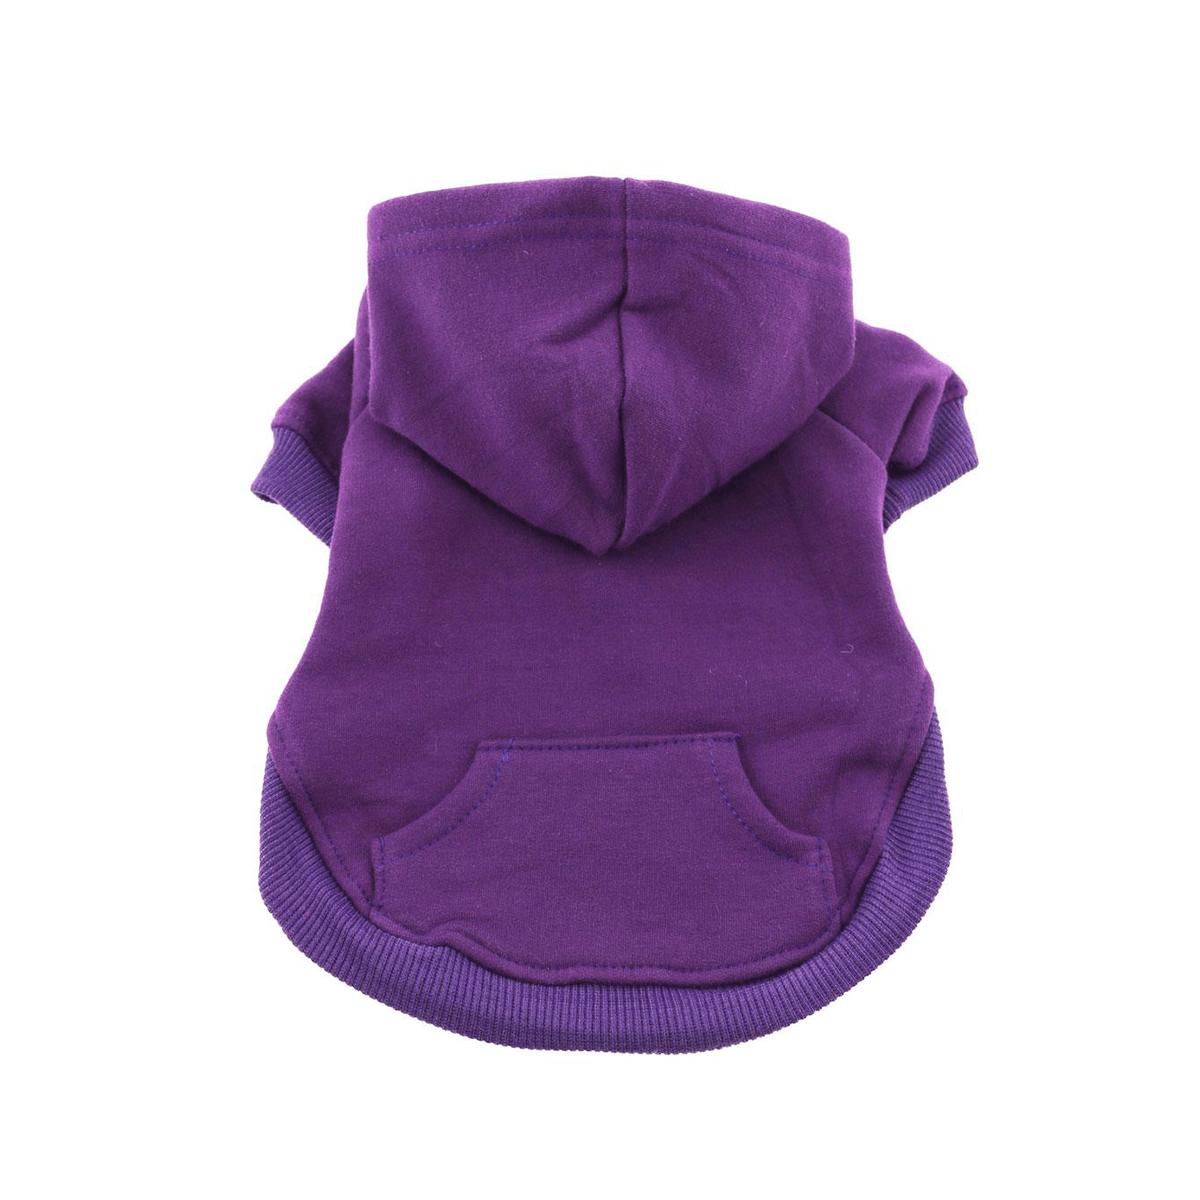 Flex Fit Hoodie in Purple | Pawlicious & Company